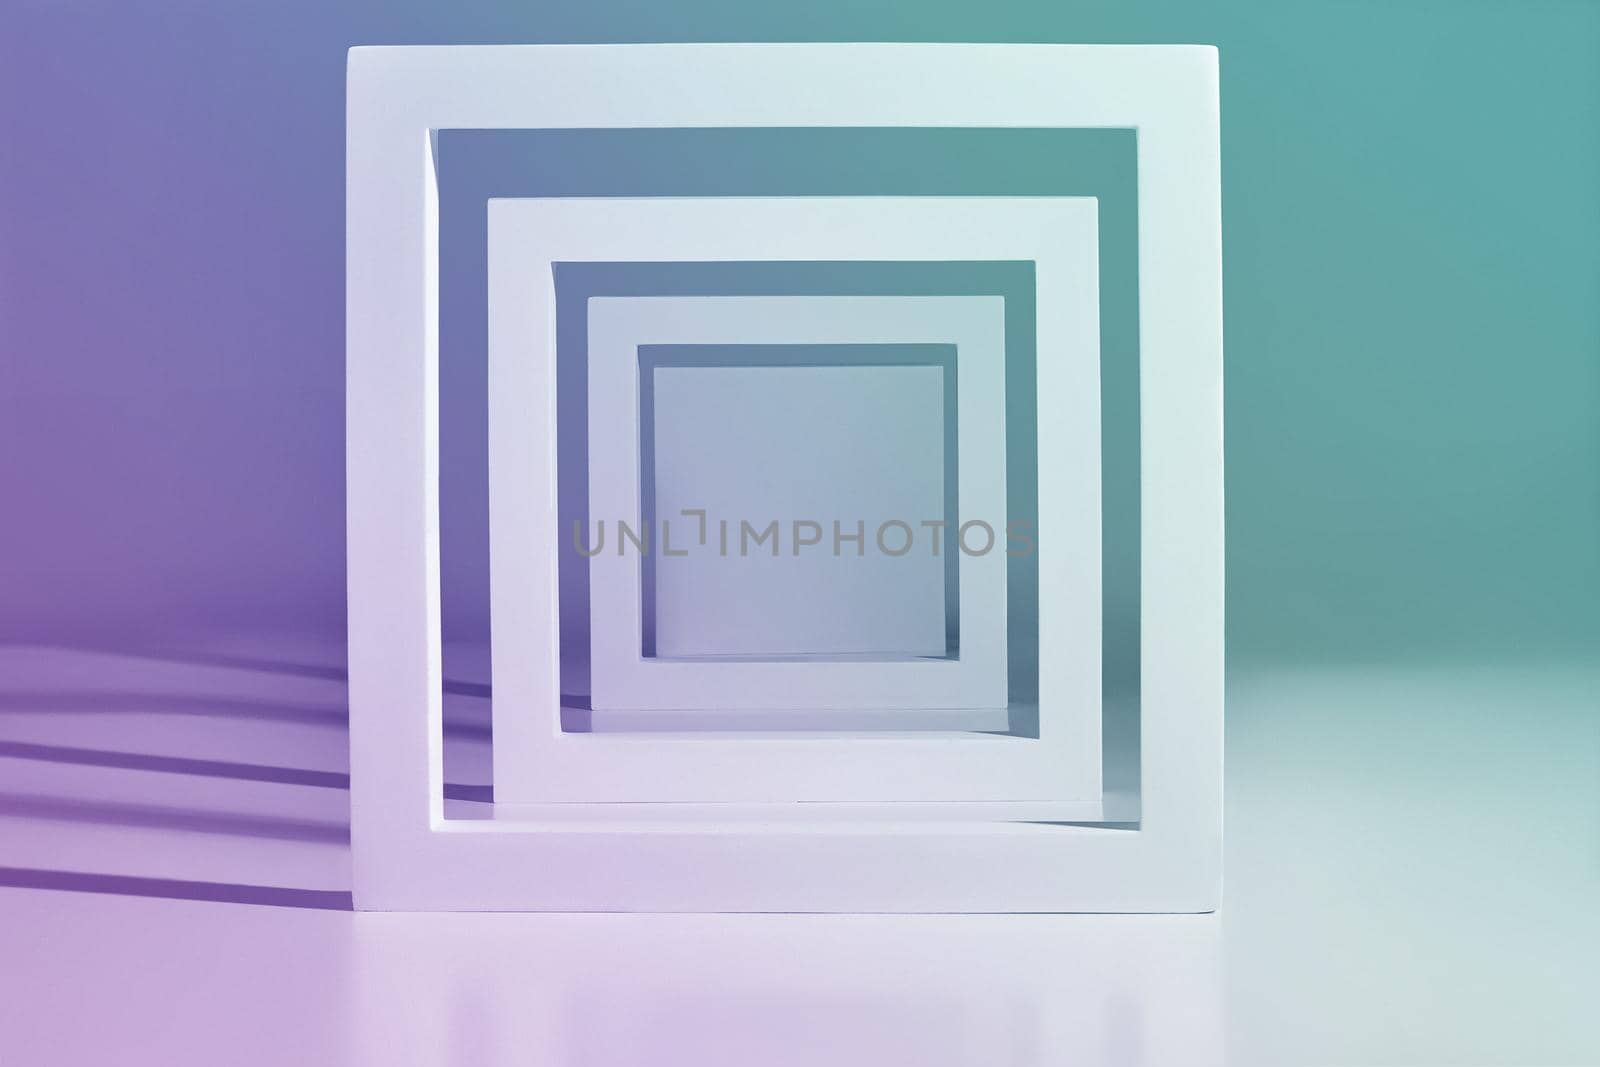 Minimalist podium for displaying product from square frames on colored background by nazarovsergey